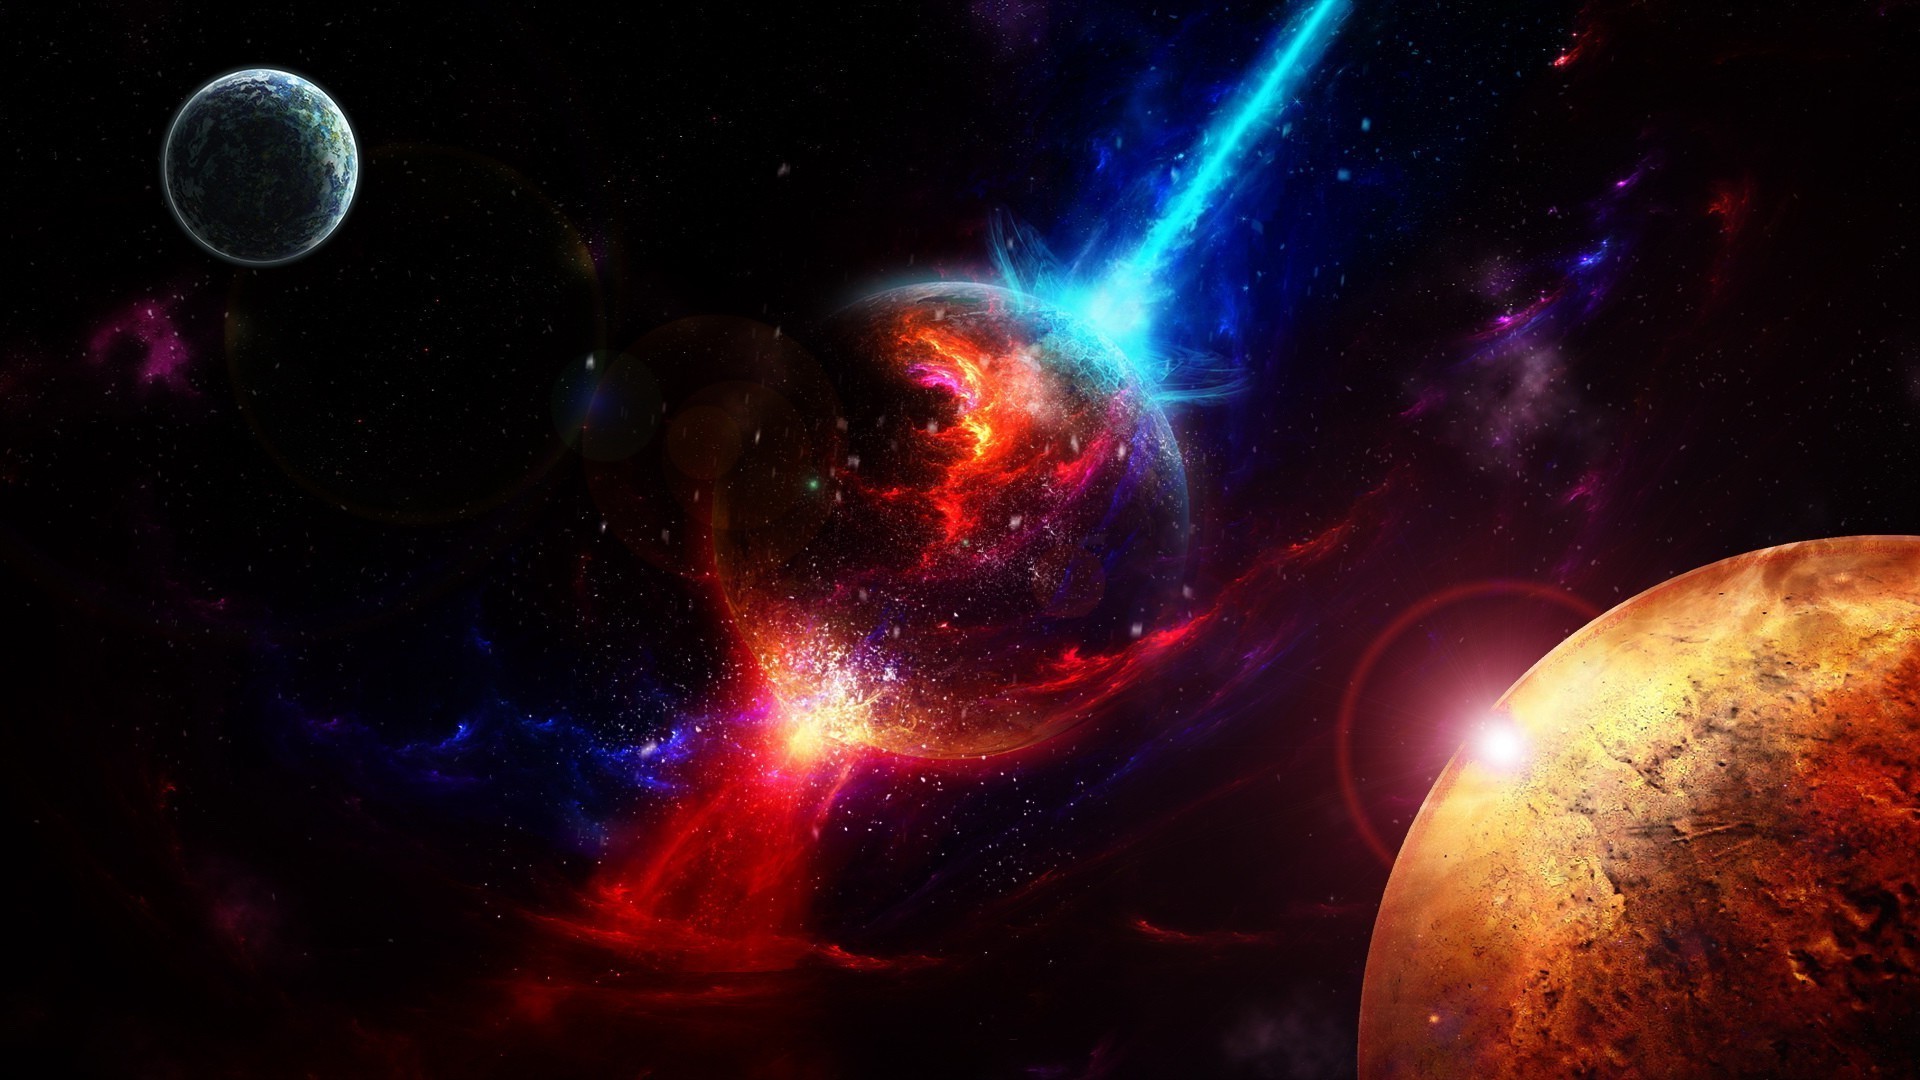 1920x1080 Explore and share HD Explosion Wallpaper on WallpaperSafari